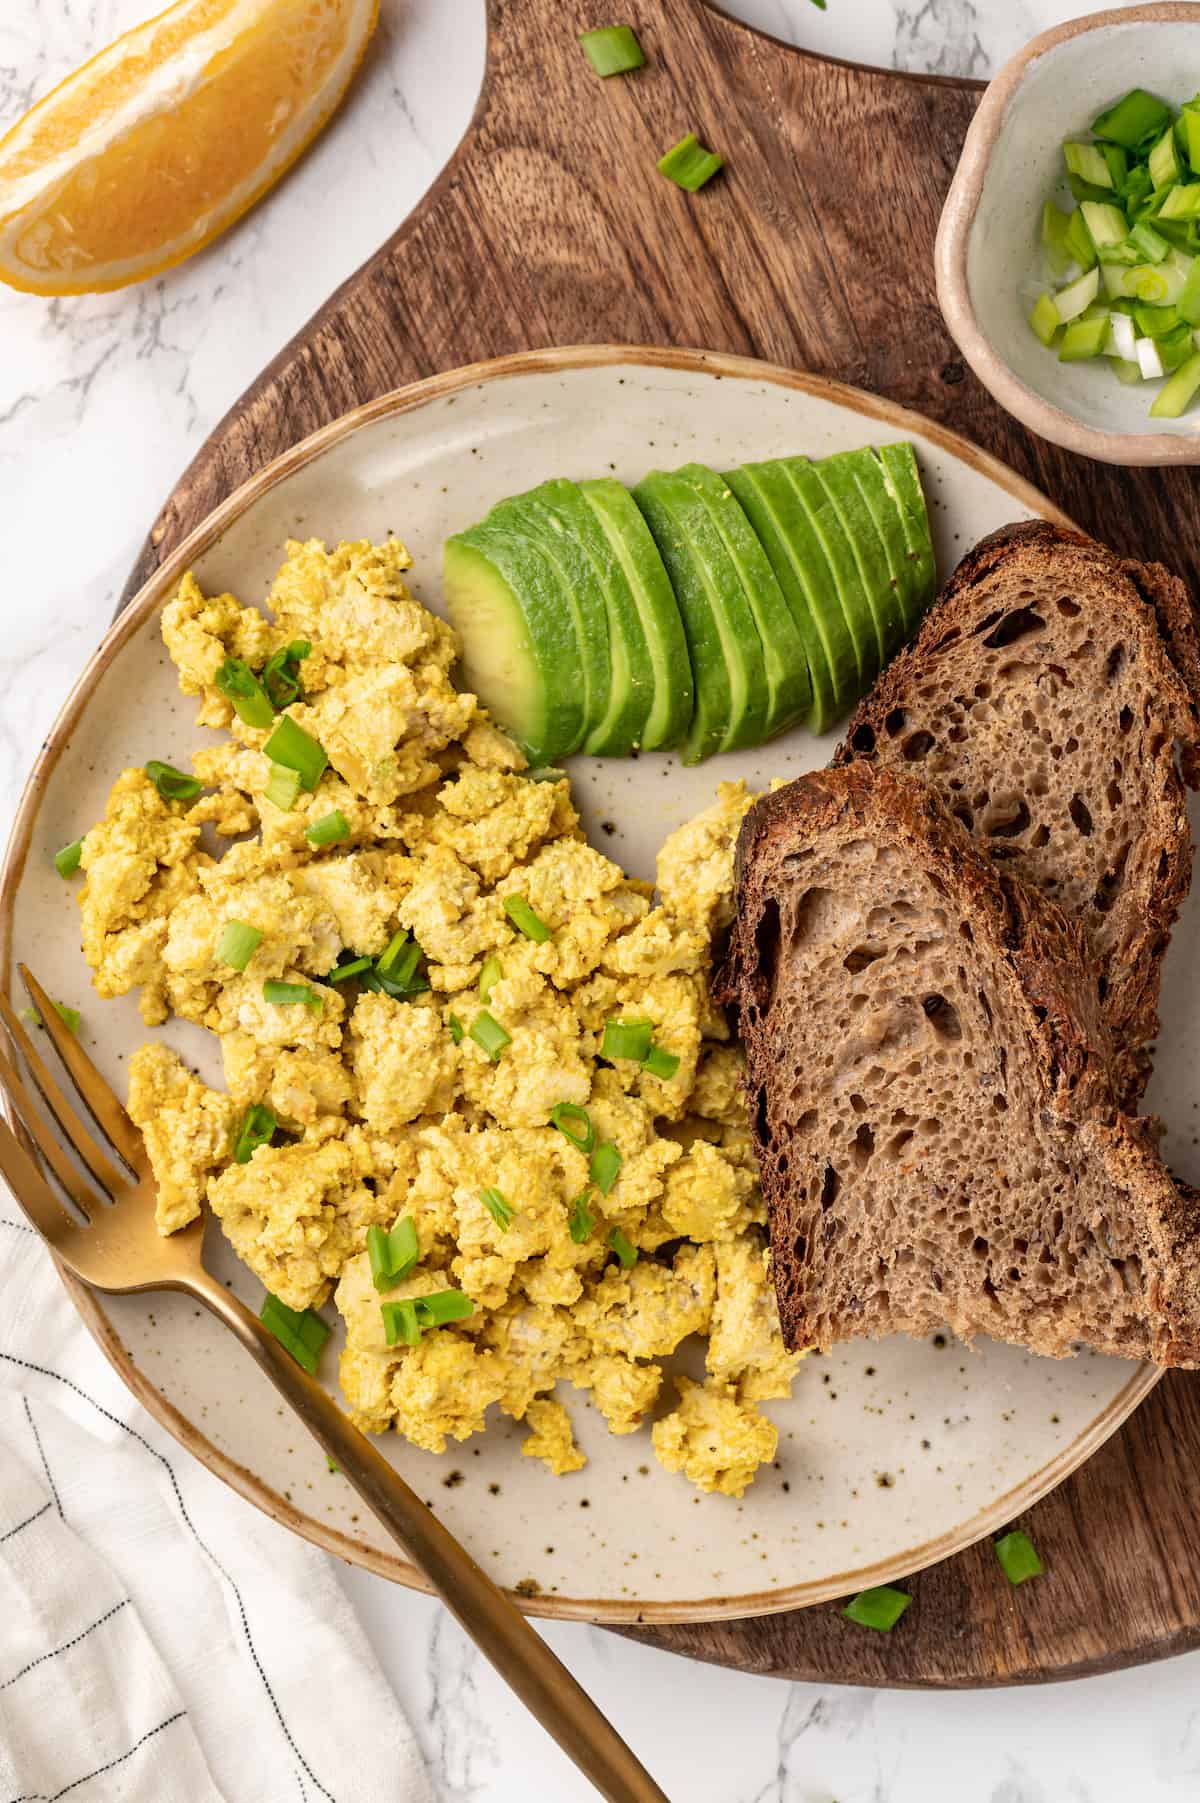 Overhead view of scrambled vegan egg on plate with sliced avocado and toast